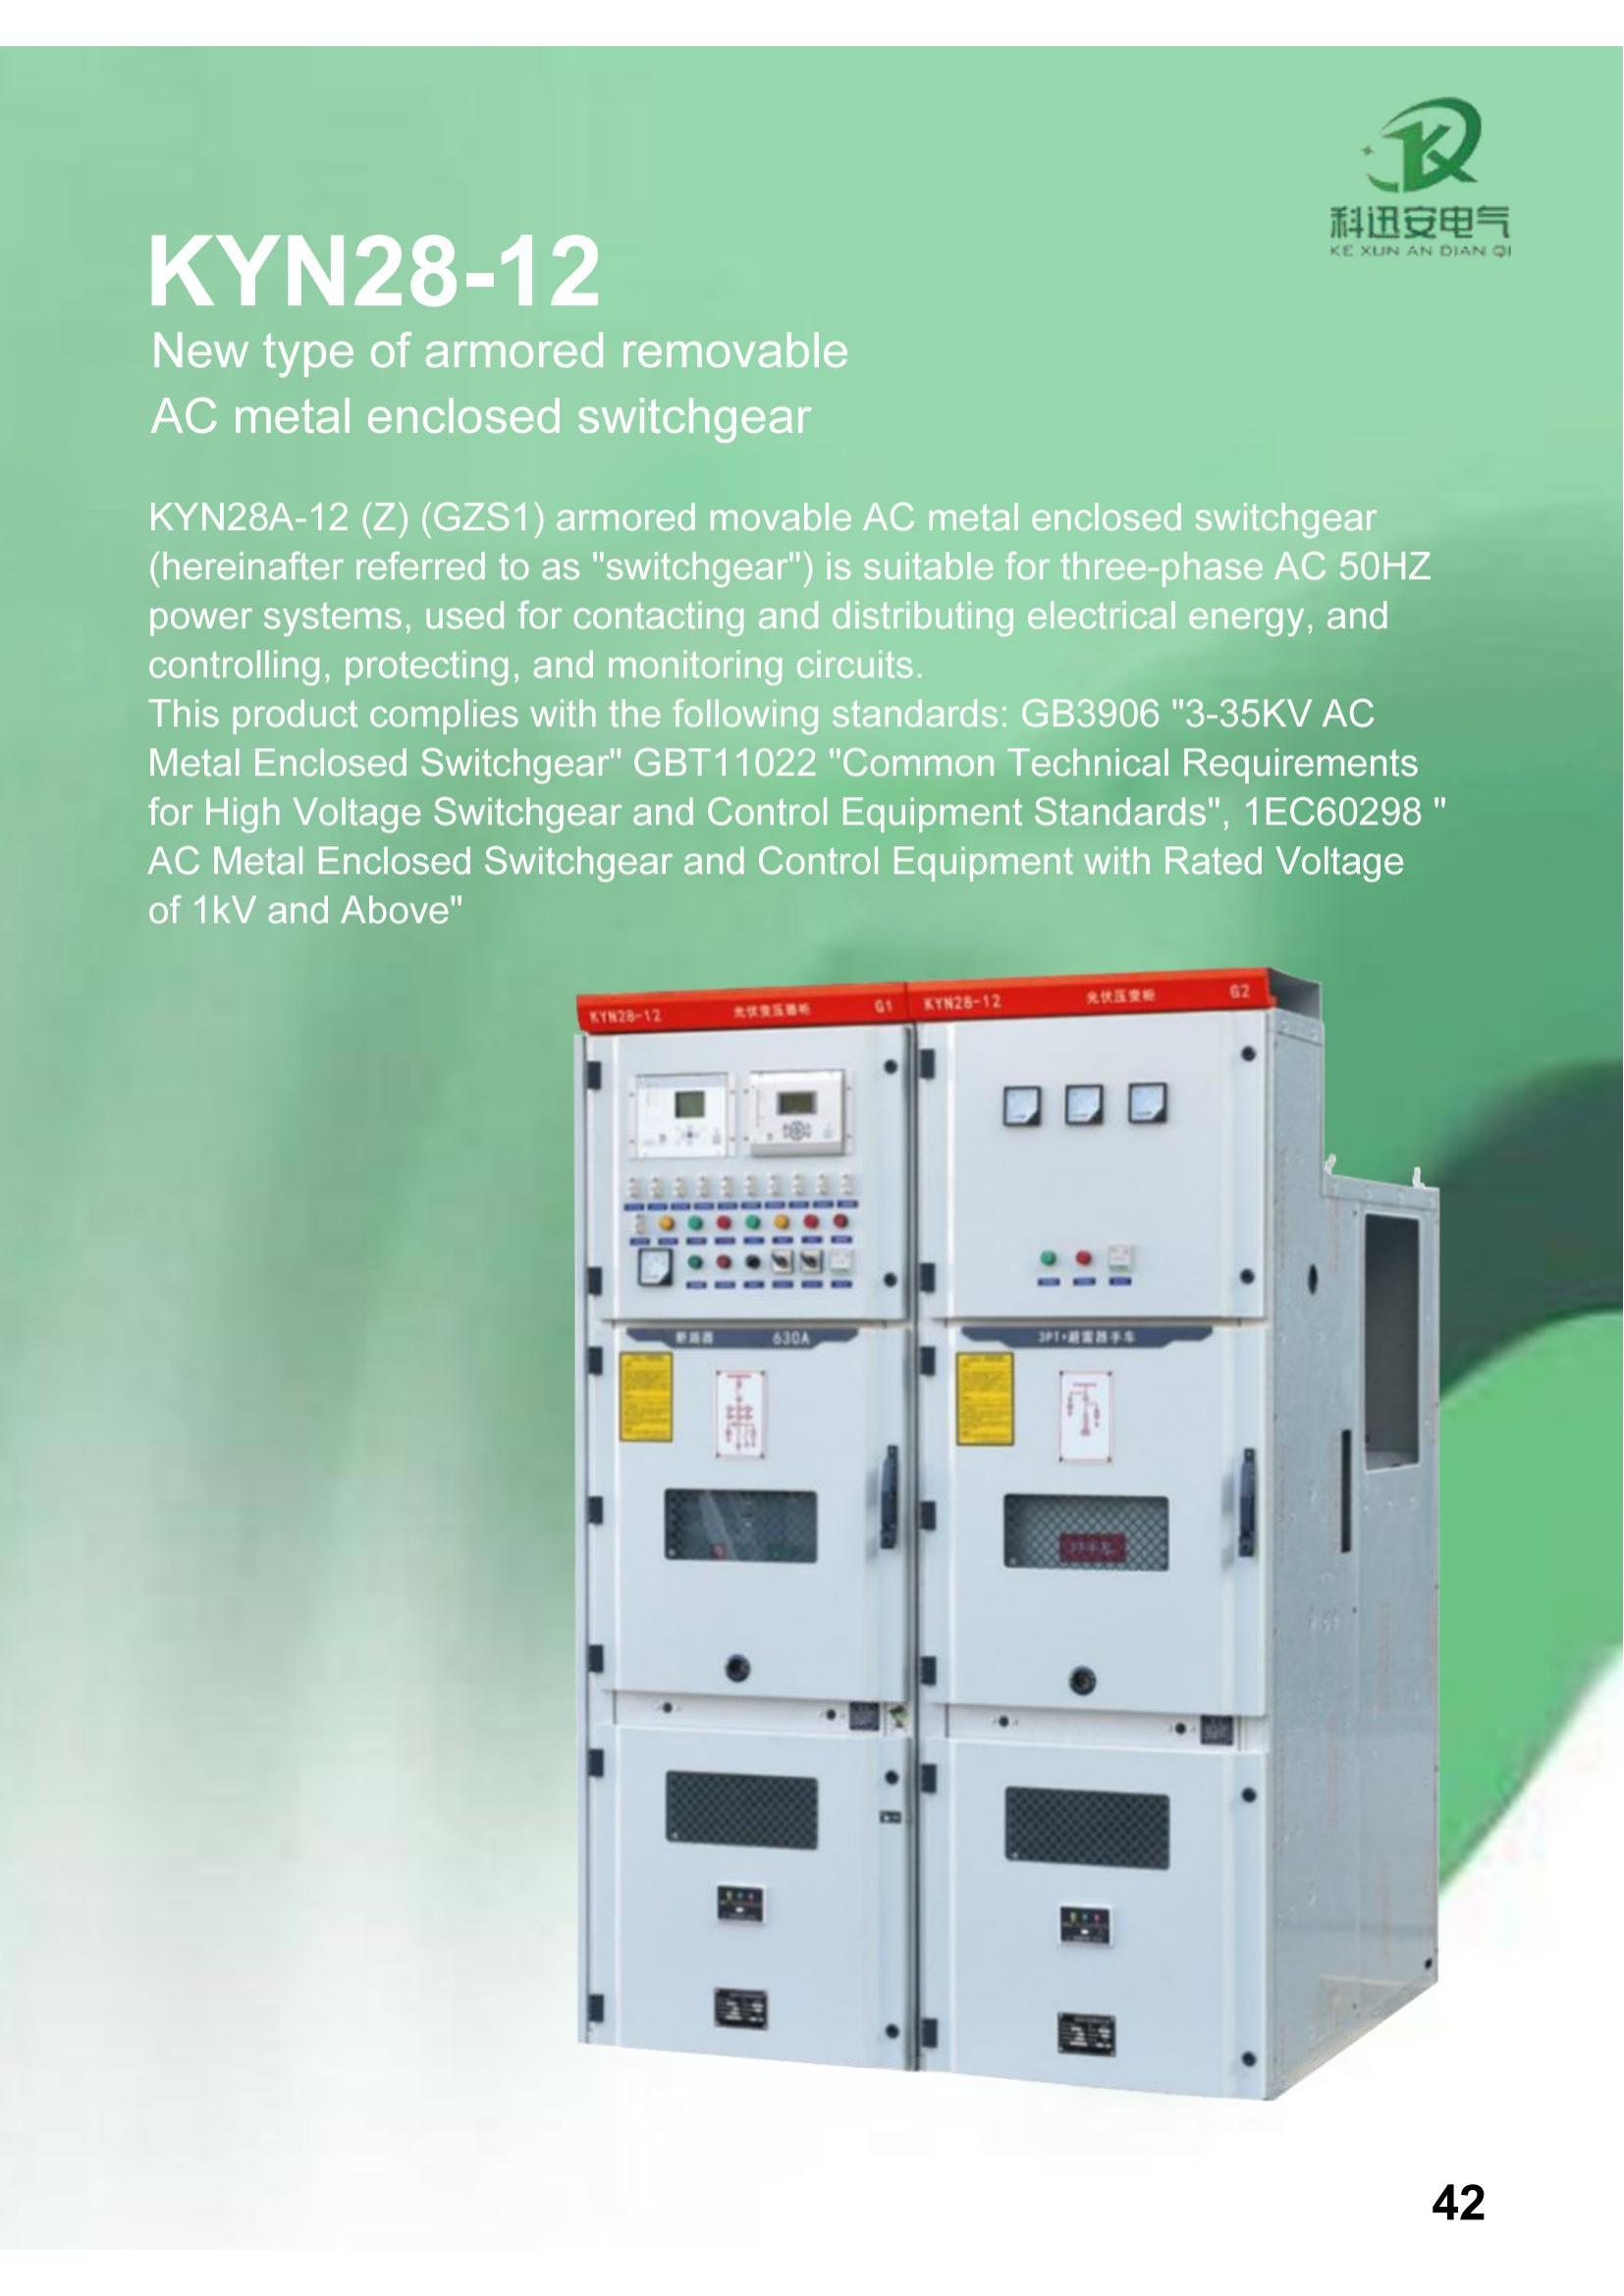 KYN28-12 New type of armored removable AC metal enclosed switchgear